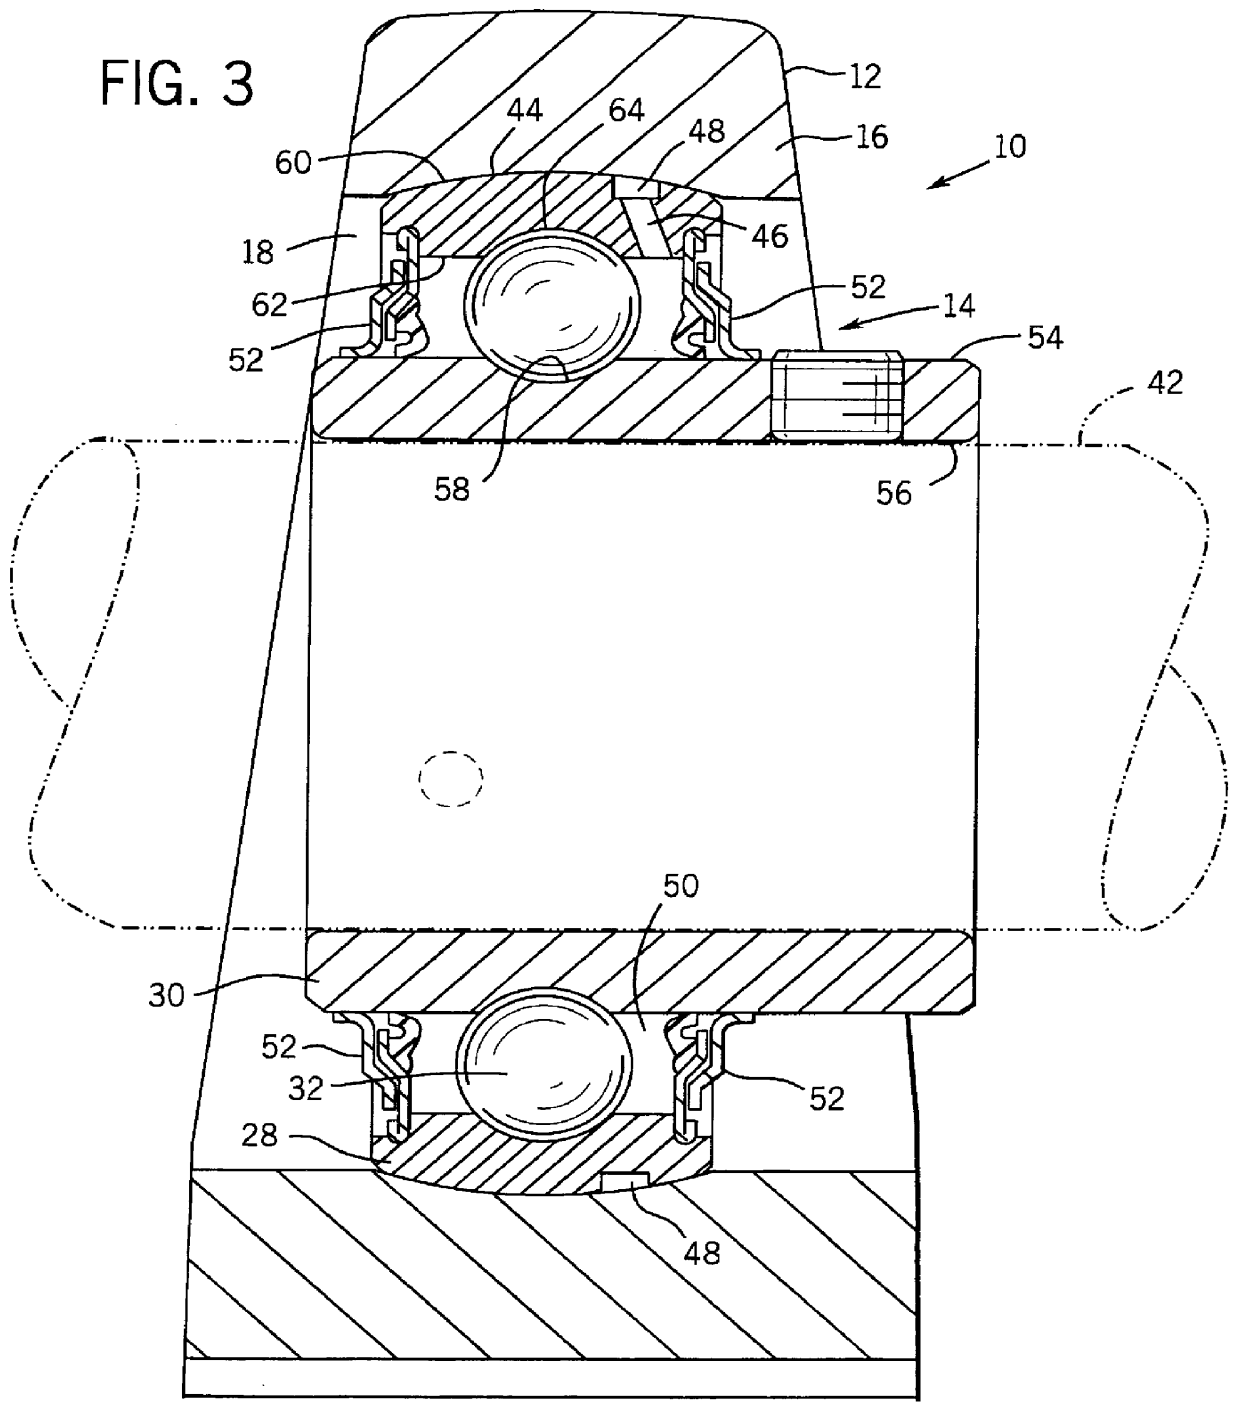 Corrosion resistant antifriction bearing and method for making same